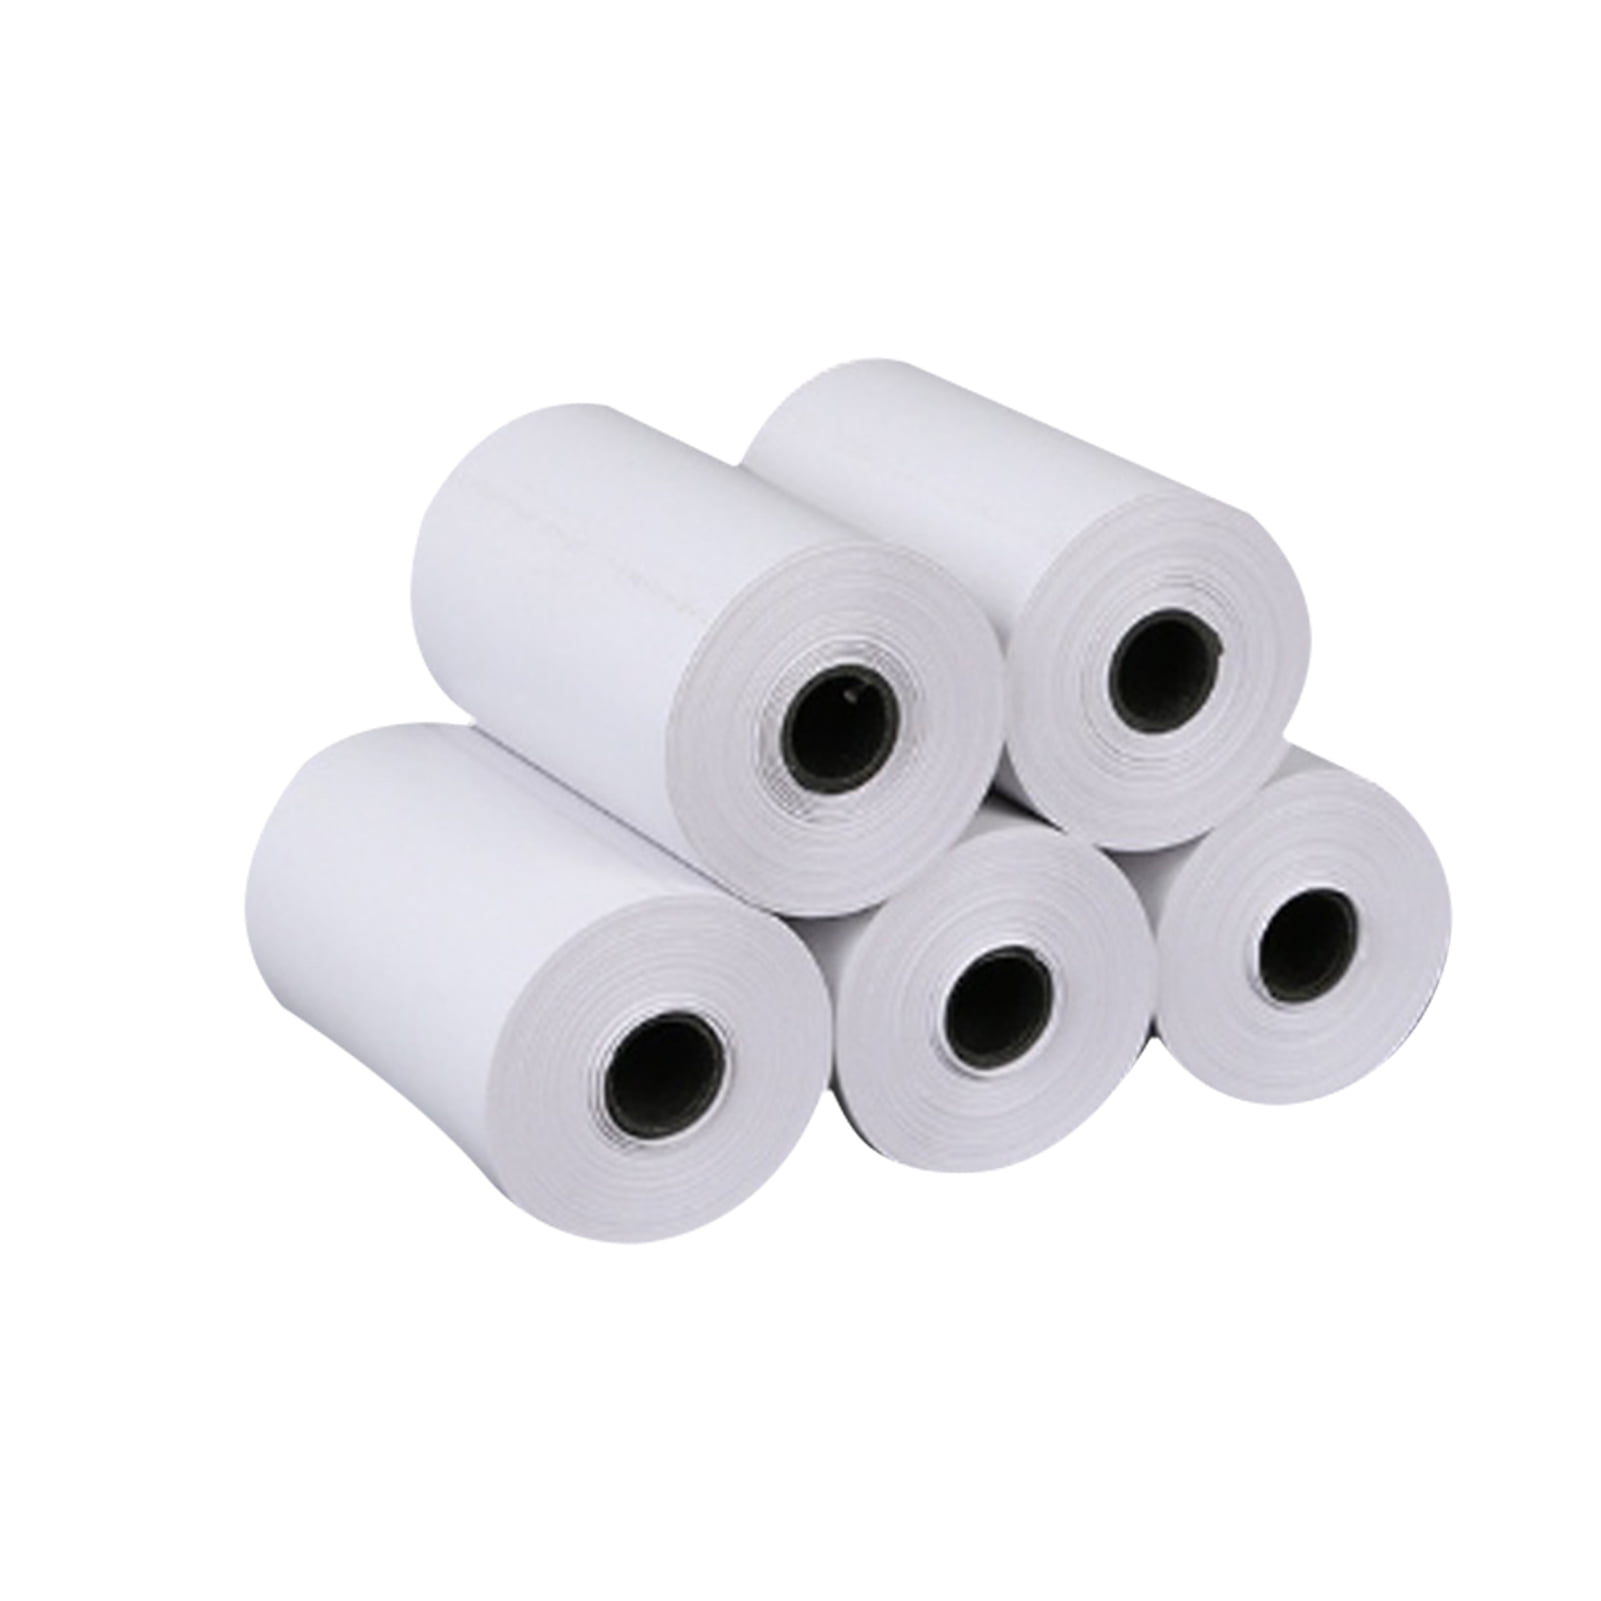 5Pcs/Set 57x30mm Thermal Receipt Paper Roll for Mobile POS 58mm Thermal Printer 